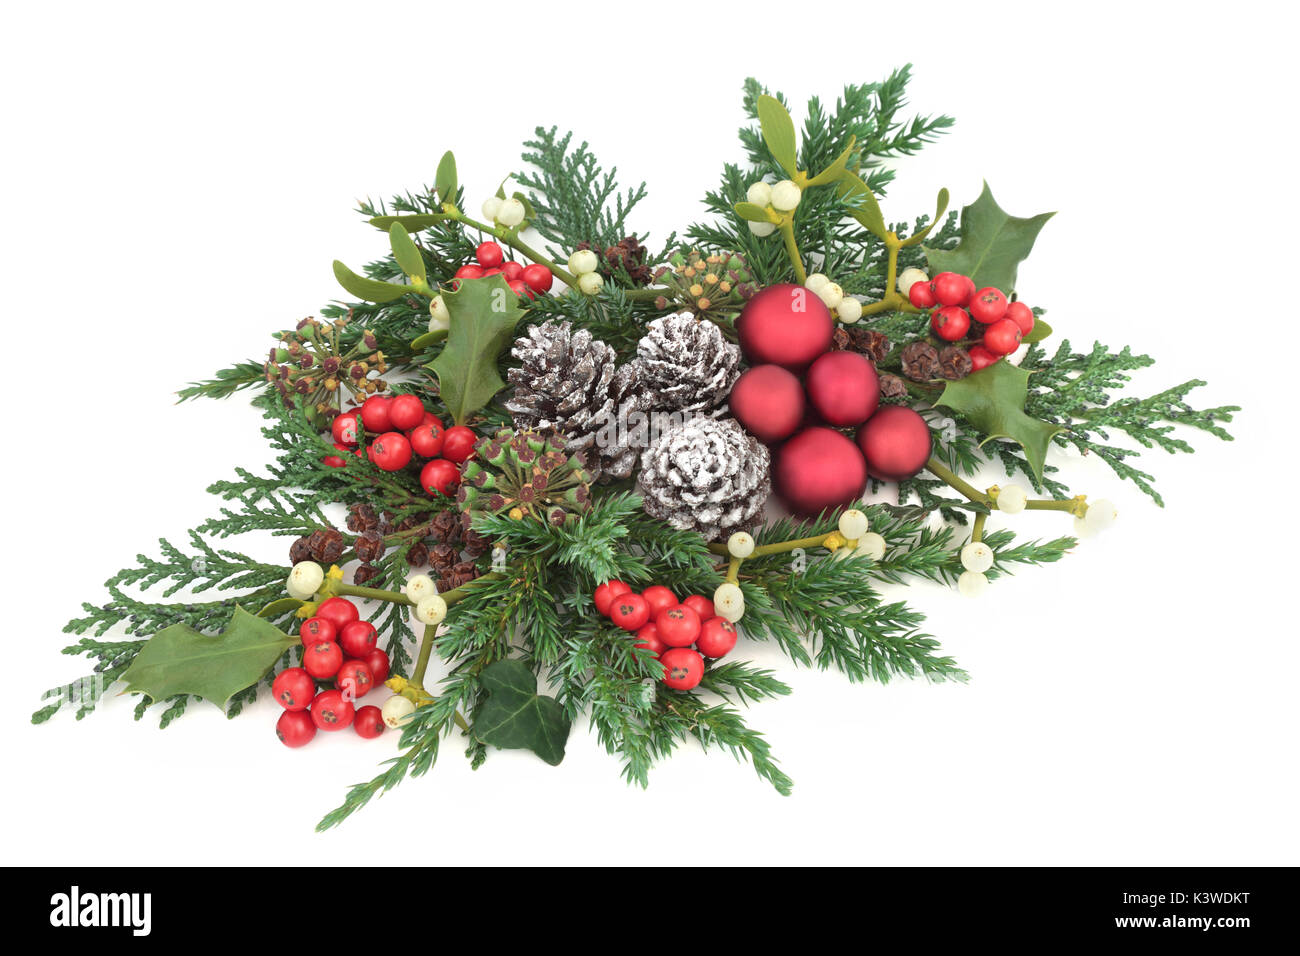 Christmas fauna with red bauble decorations, holly, ivy, mistletoe, cedar and juniper leaf sprigs and pine cones on white background. Stock Photo